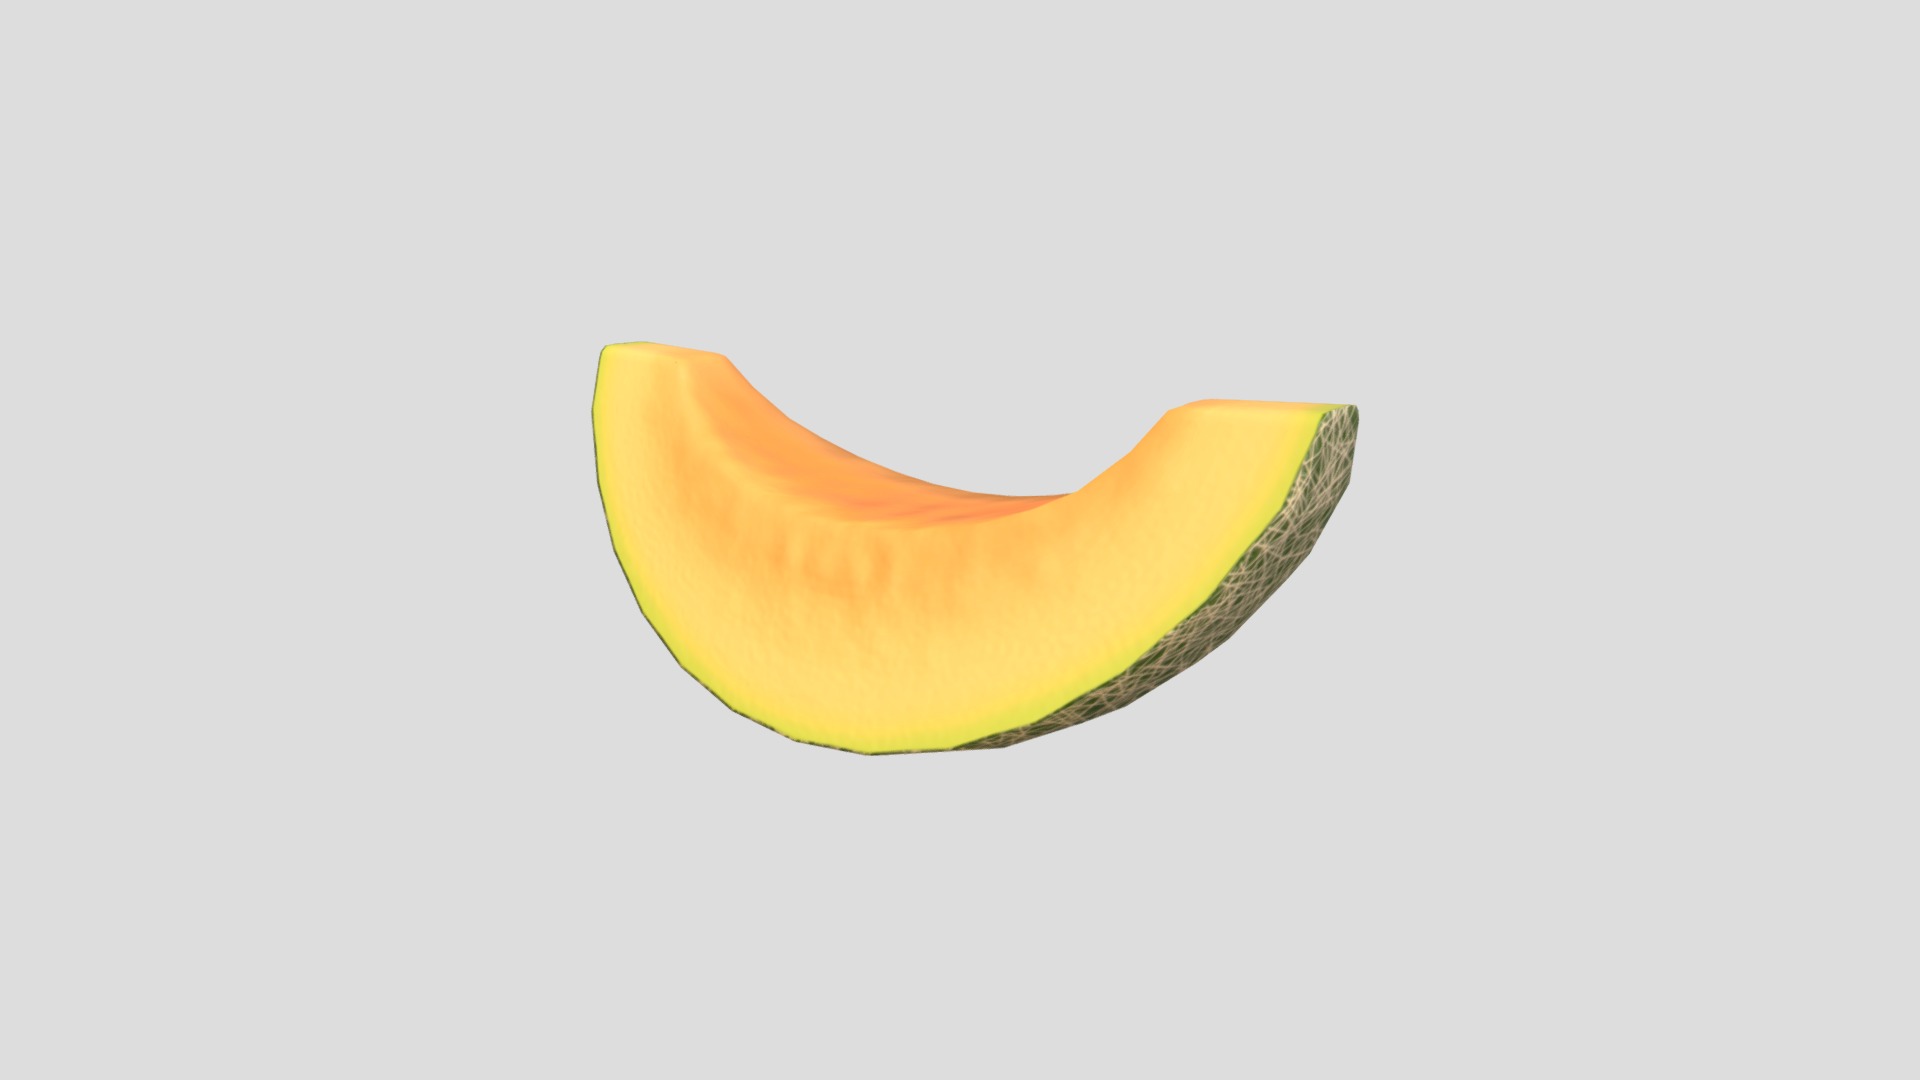 3D model Sliced Melon - This is a 3D model of the Sliced Melon. The 3D model is about a yellow and orange peel.